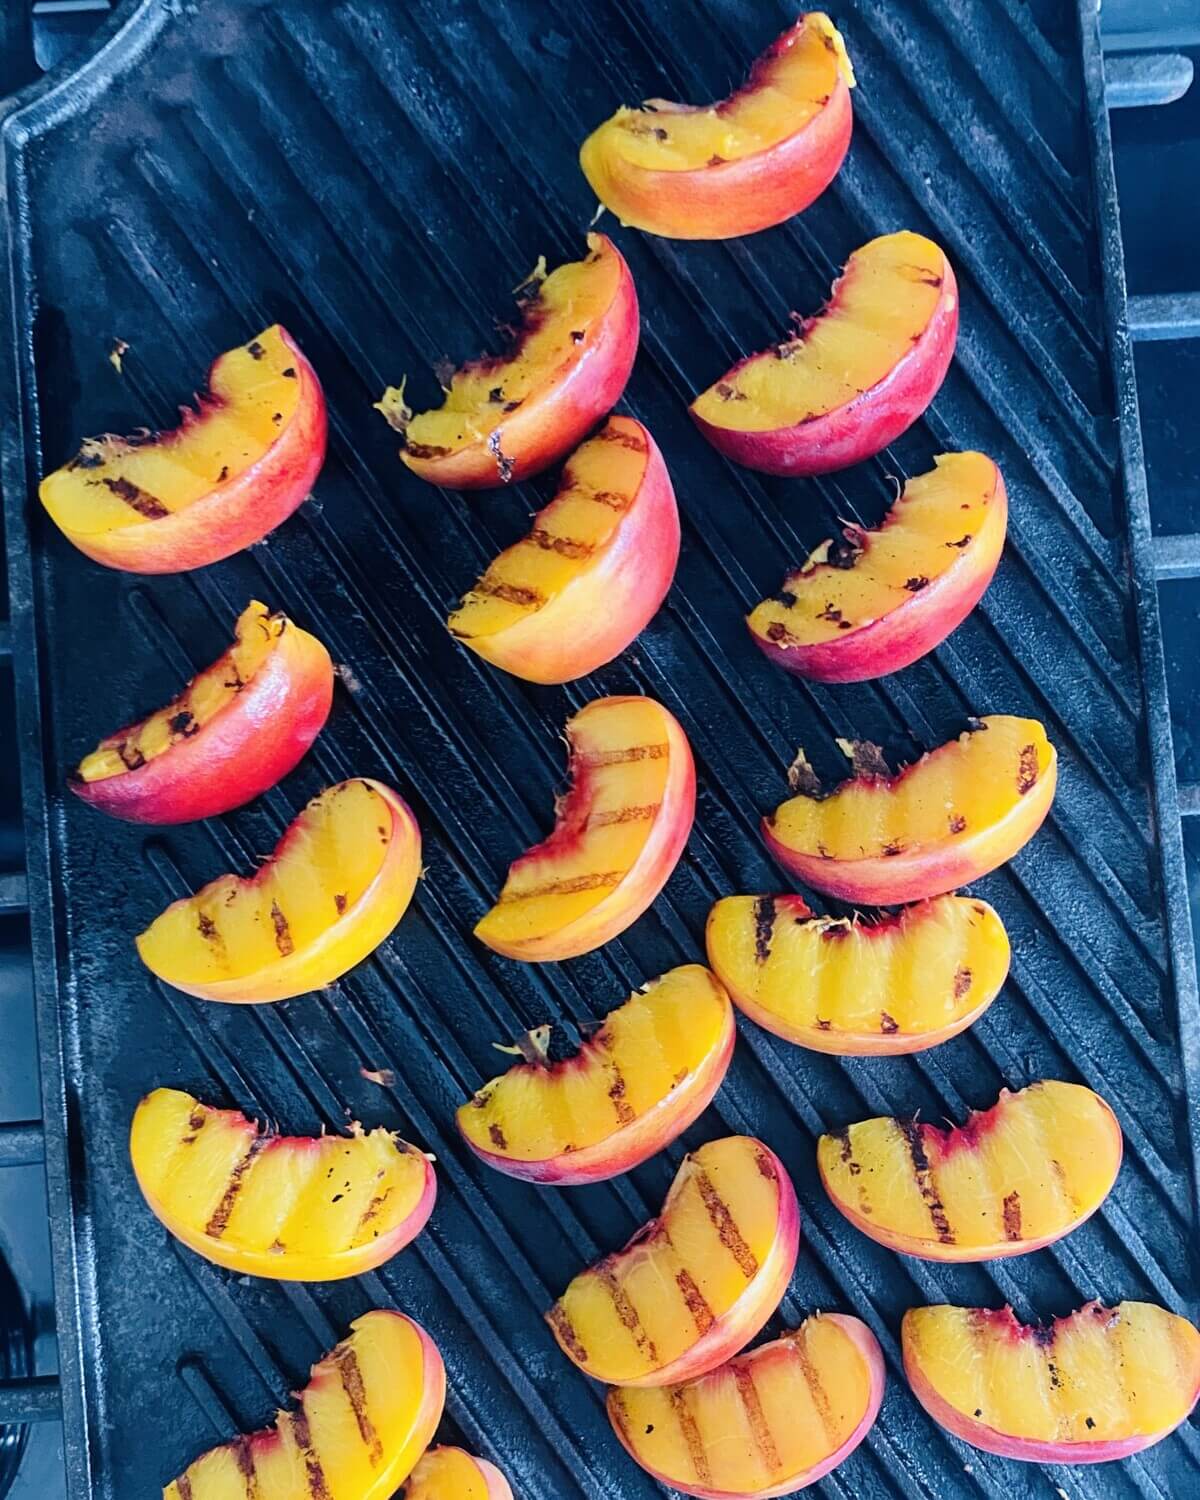 grilling peaches on a grill pan.